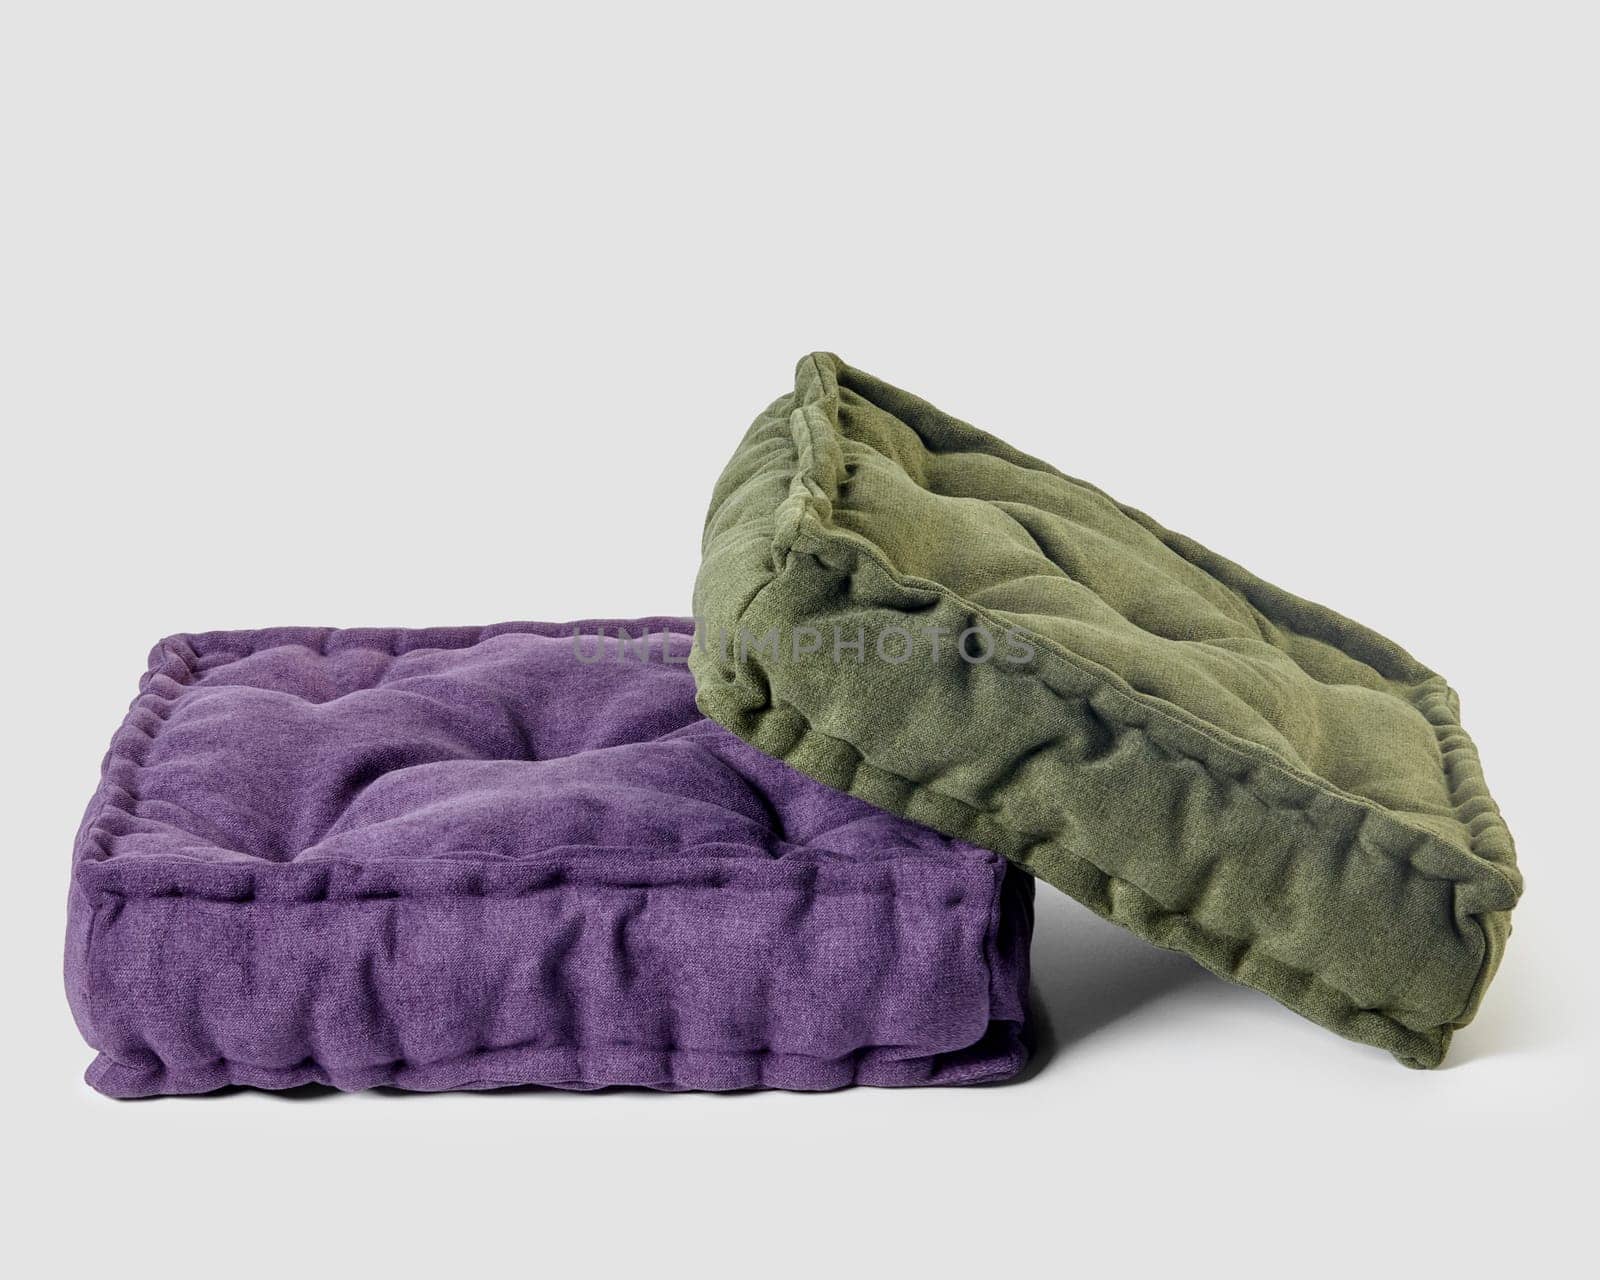 Purple and green plush linen floor cushions on white background by nazarovsergey